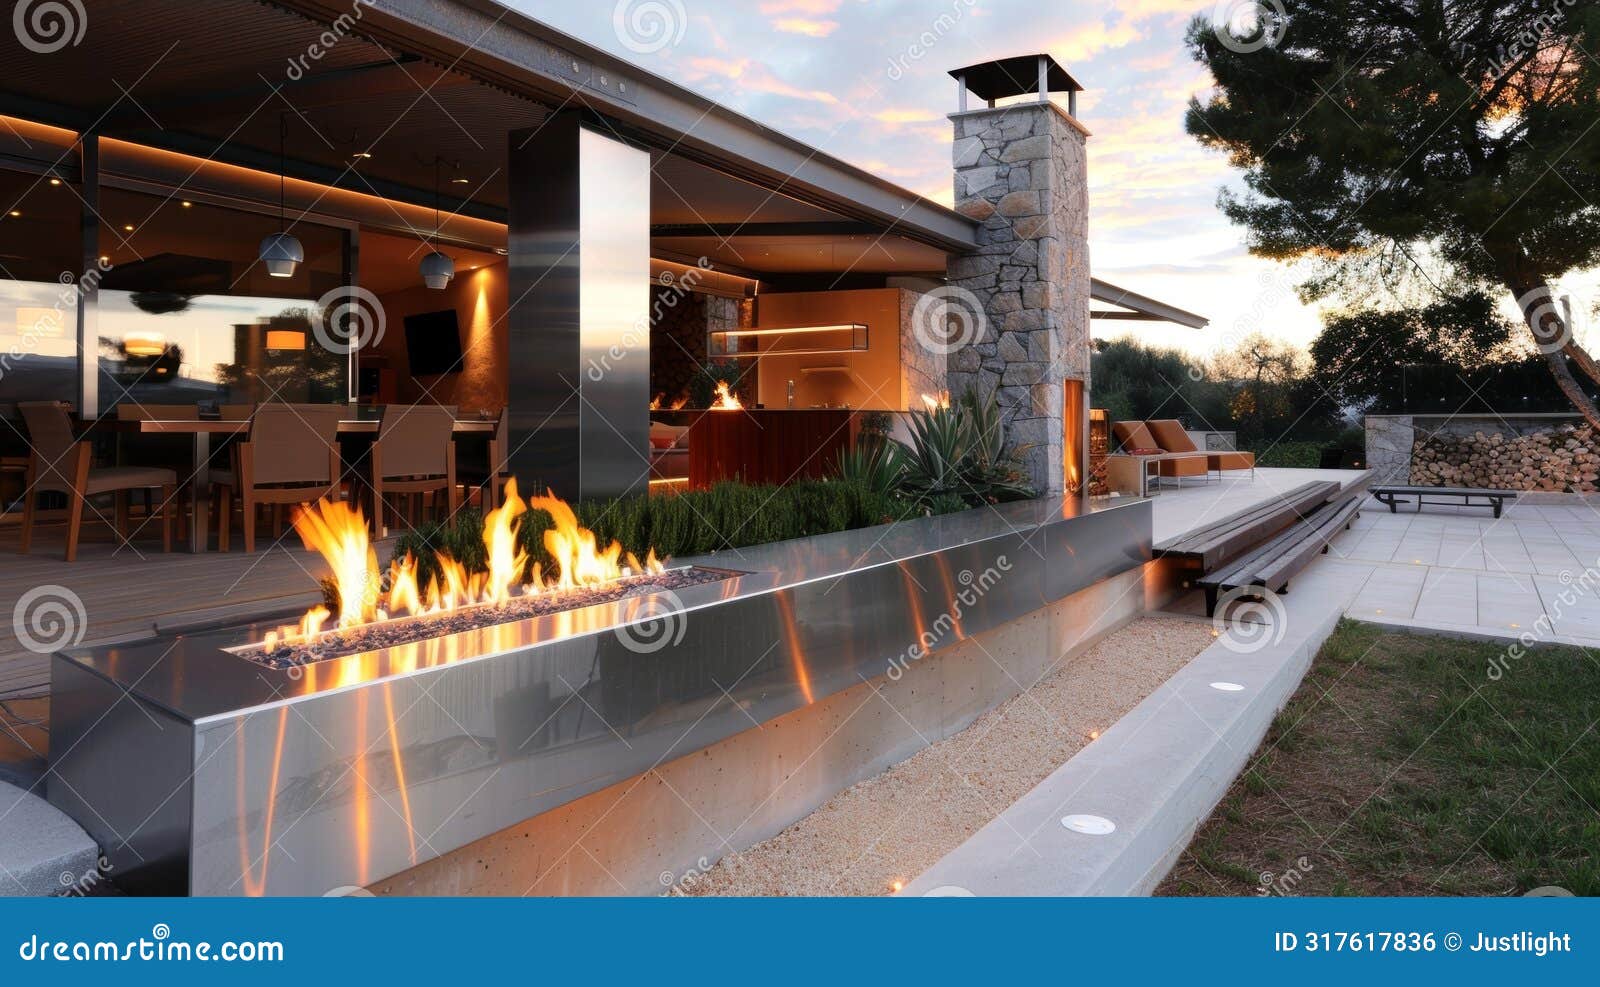 the fireplaces sleek stainless steel exterior contrasts beautifully against the warm fiery flames within. 2d flat